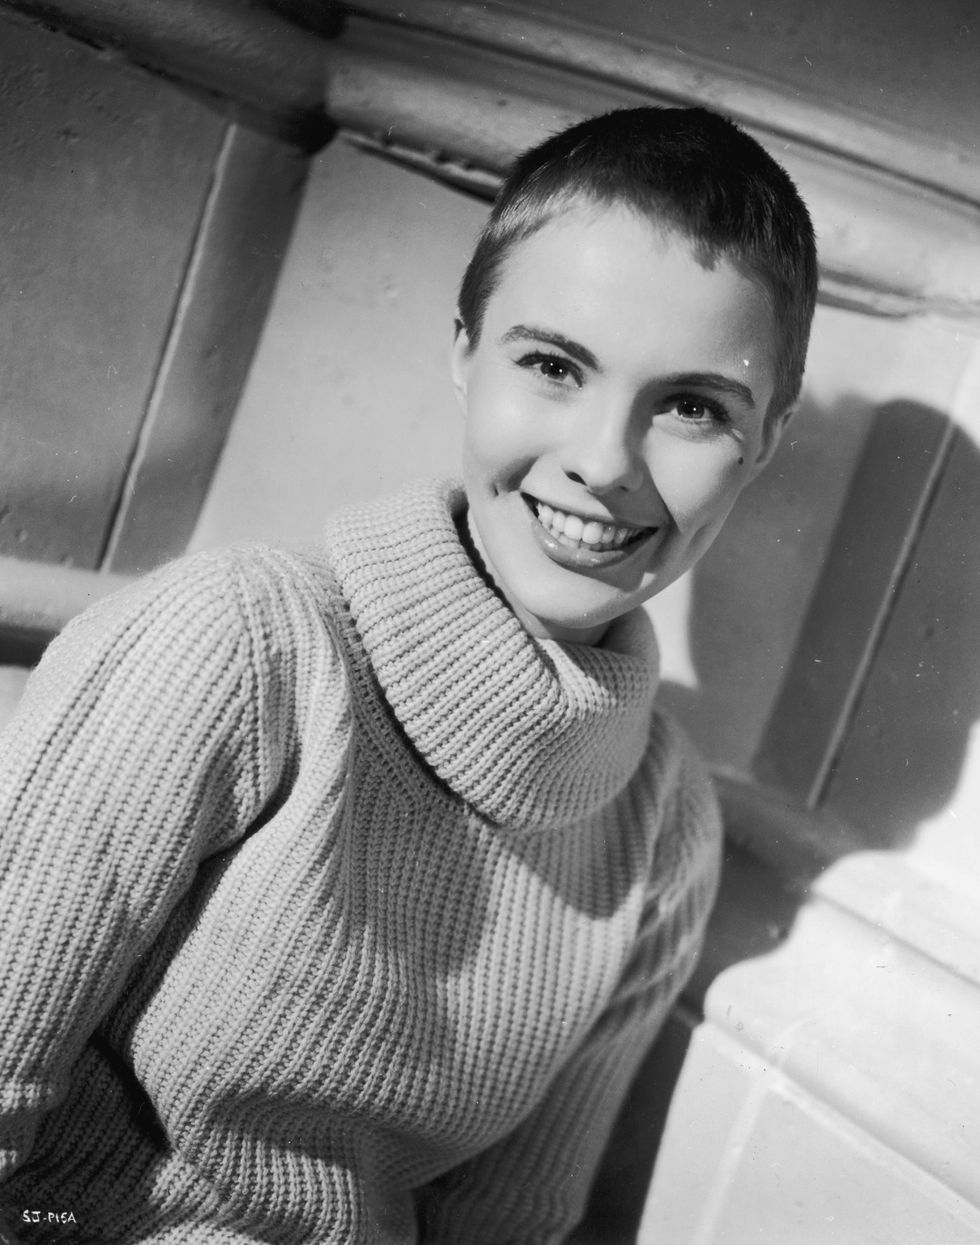 <p>Actress Jean Seberg buzzed her hair in 1957 for her debut role as Joan of Arc in <em>Saint Joan</em>. </p>